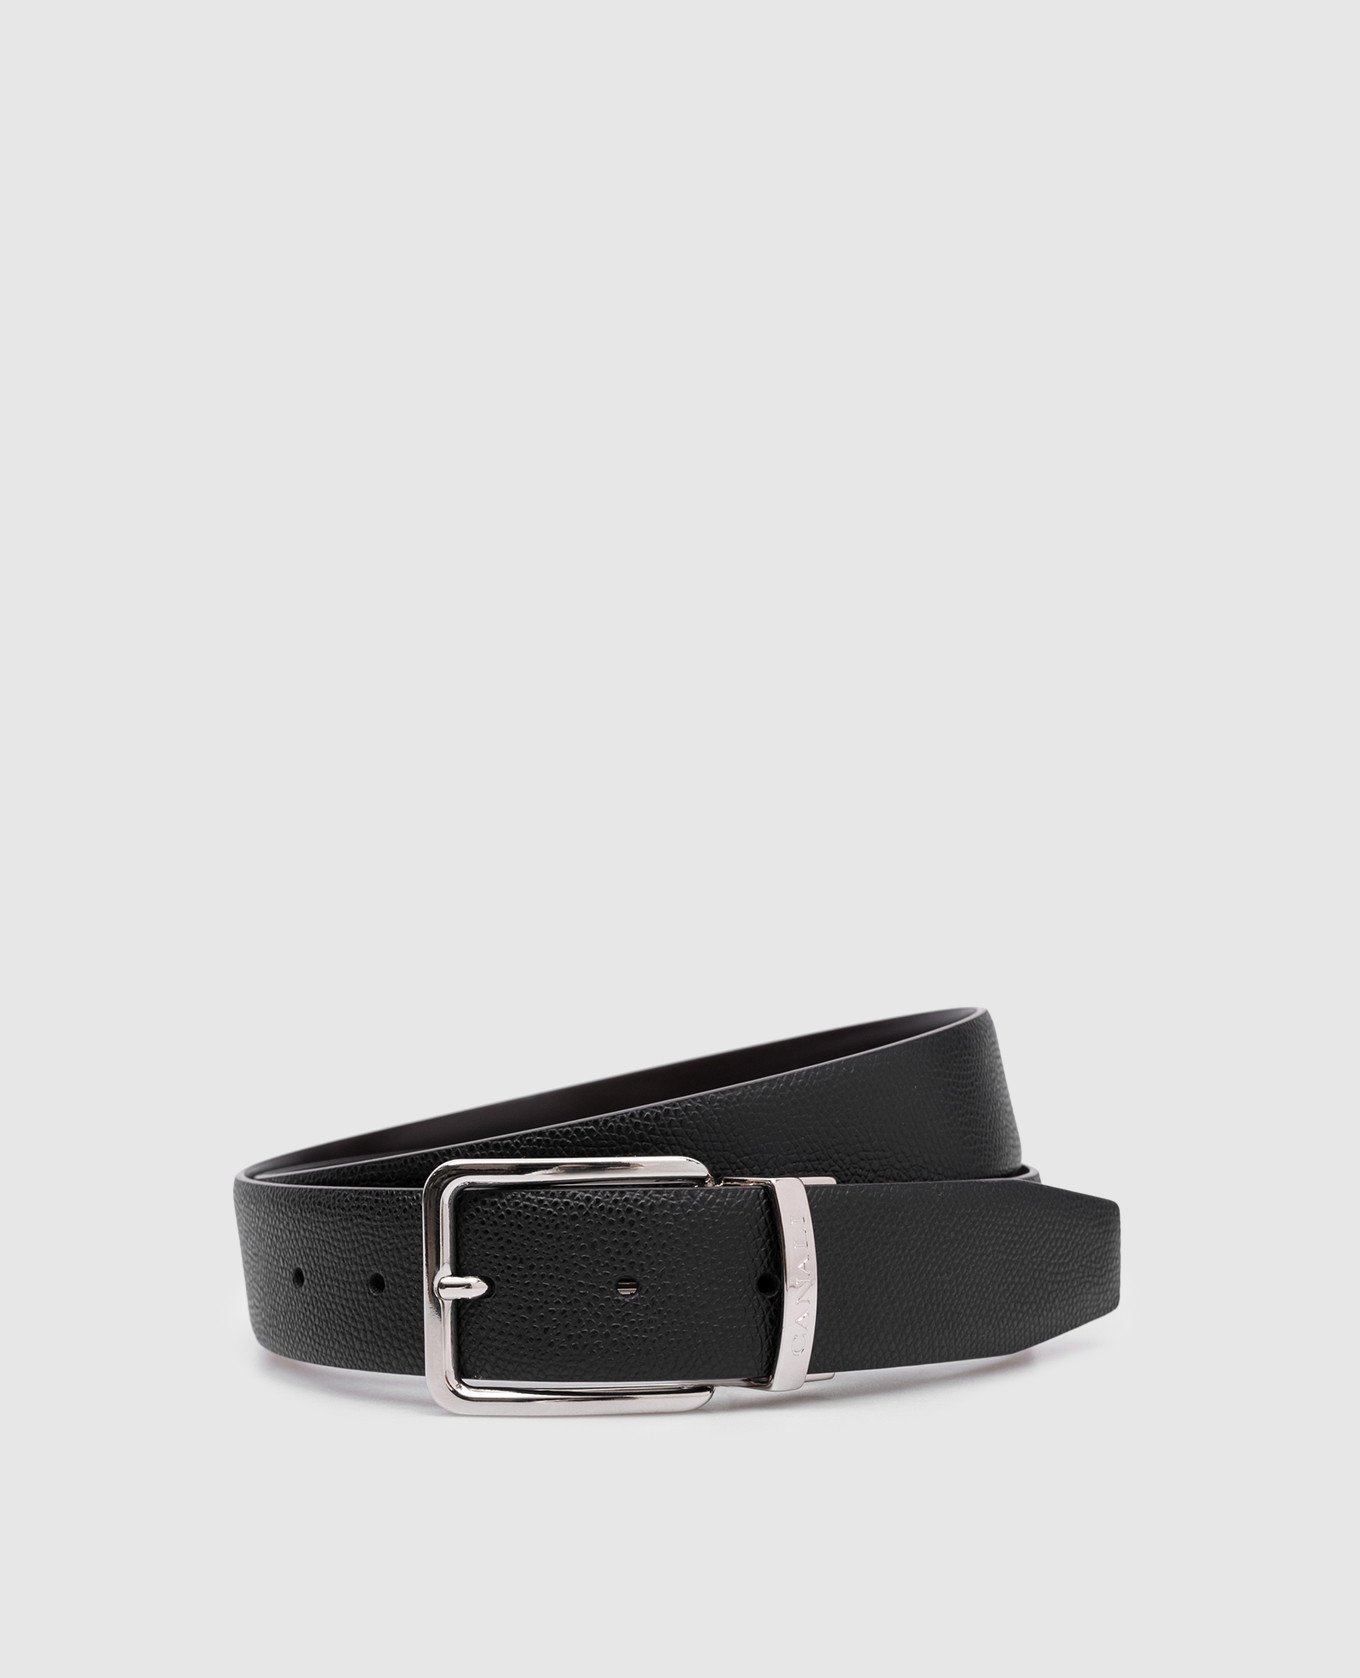 Black double-sided leather strap with logo engraving